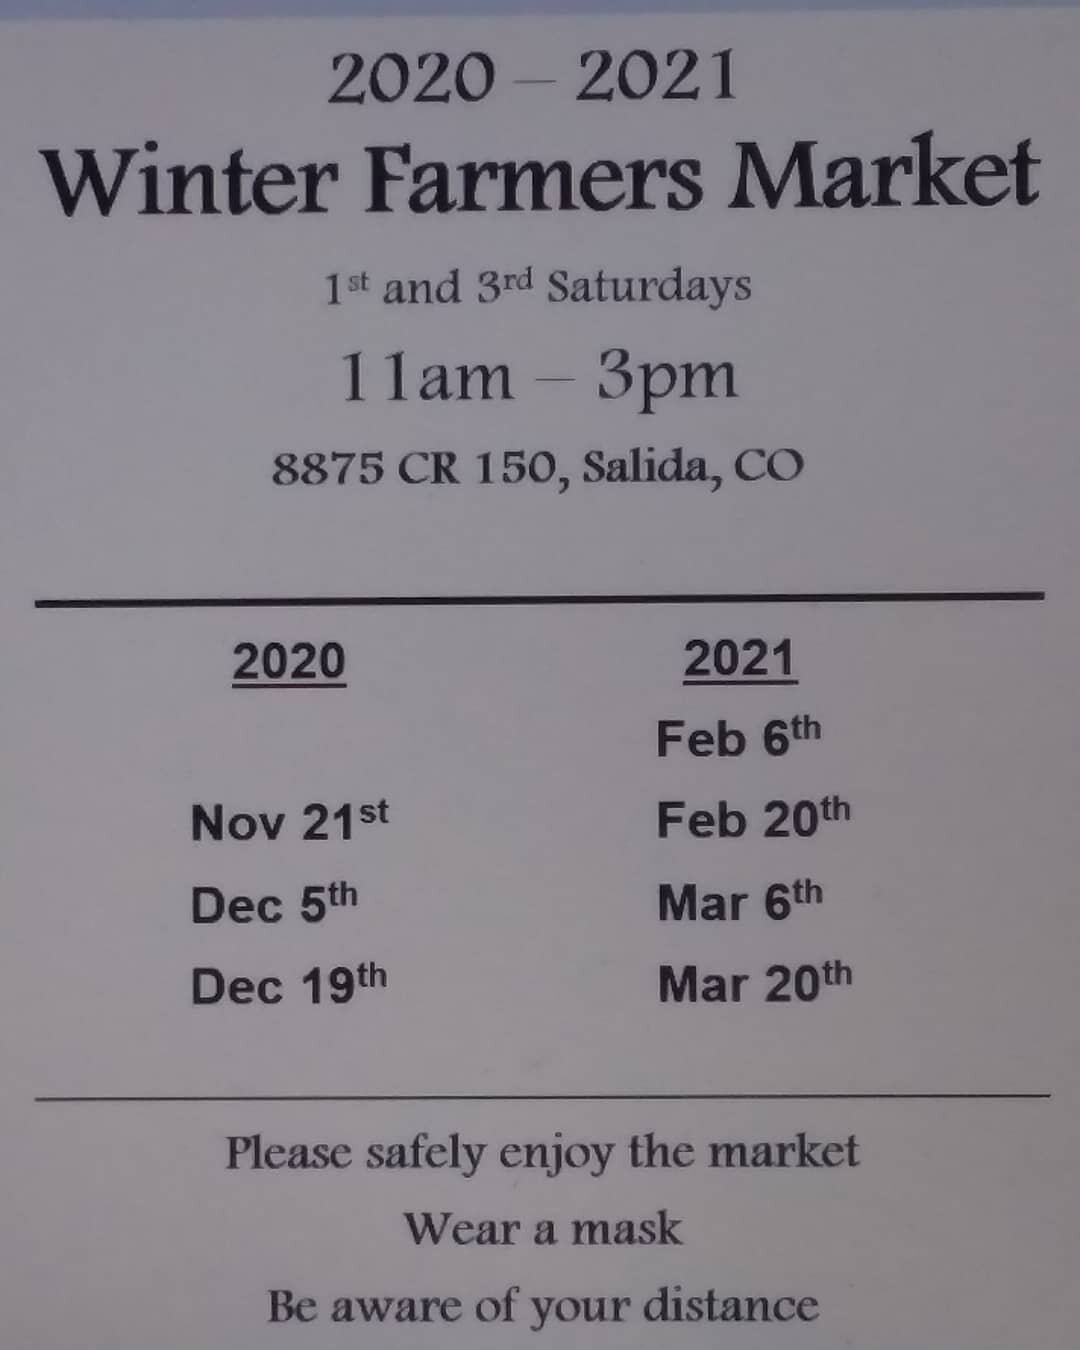 First winter farmers market of the season. Help us start it off in style, come out to the farm and support local businesses this Saturday..

Our Vendors this weekend...

Badger Creek Ranch
Bliss Bags
King Kaeng Curry
La Posada
Magpie Burrito
Naturall